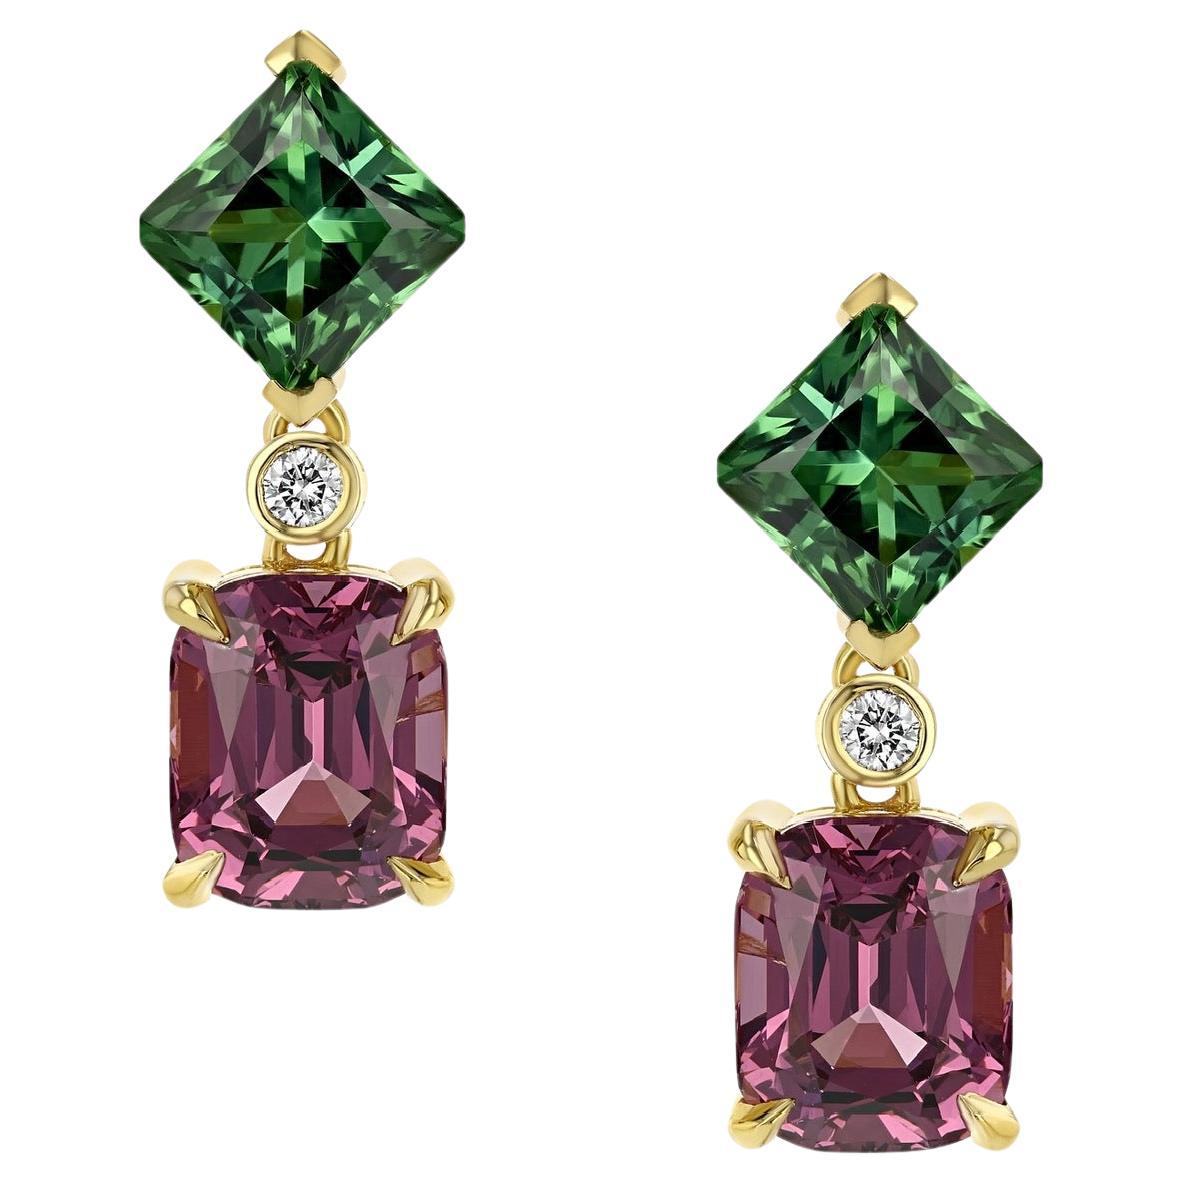 5.48ct Spinel and 2.82ct Green Tourmaline Earrings. For Sale